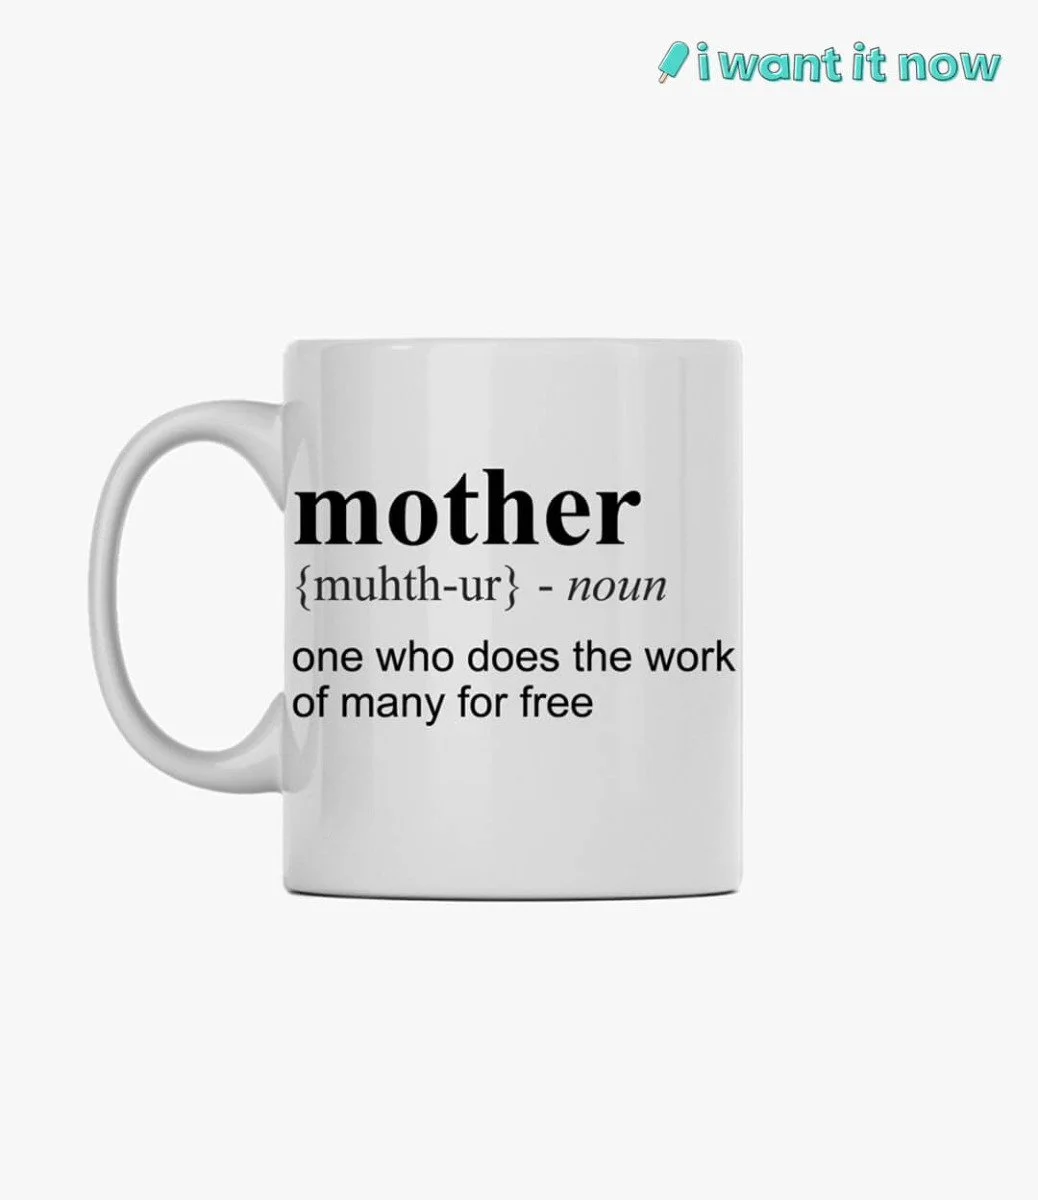 Mother: one who does the work of many for free Mug By I Want It Now